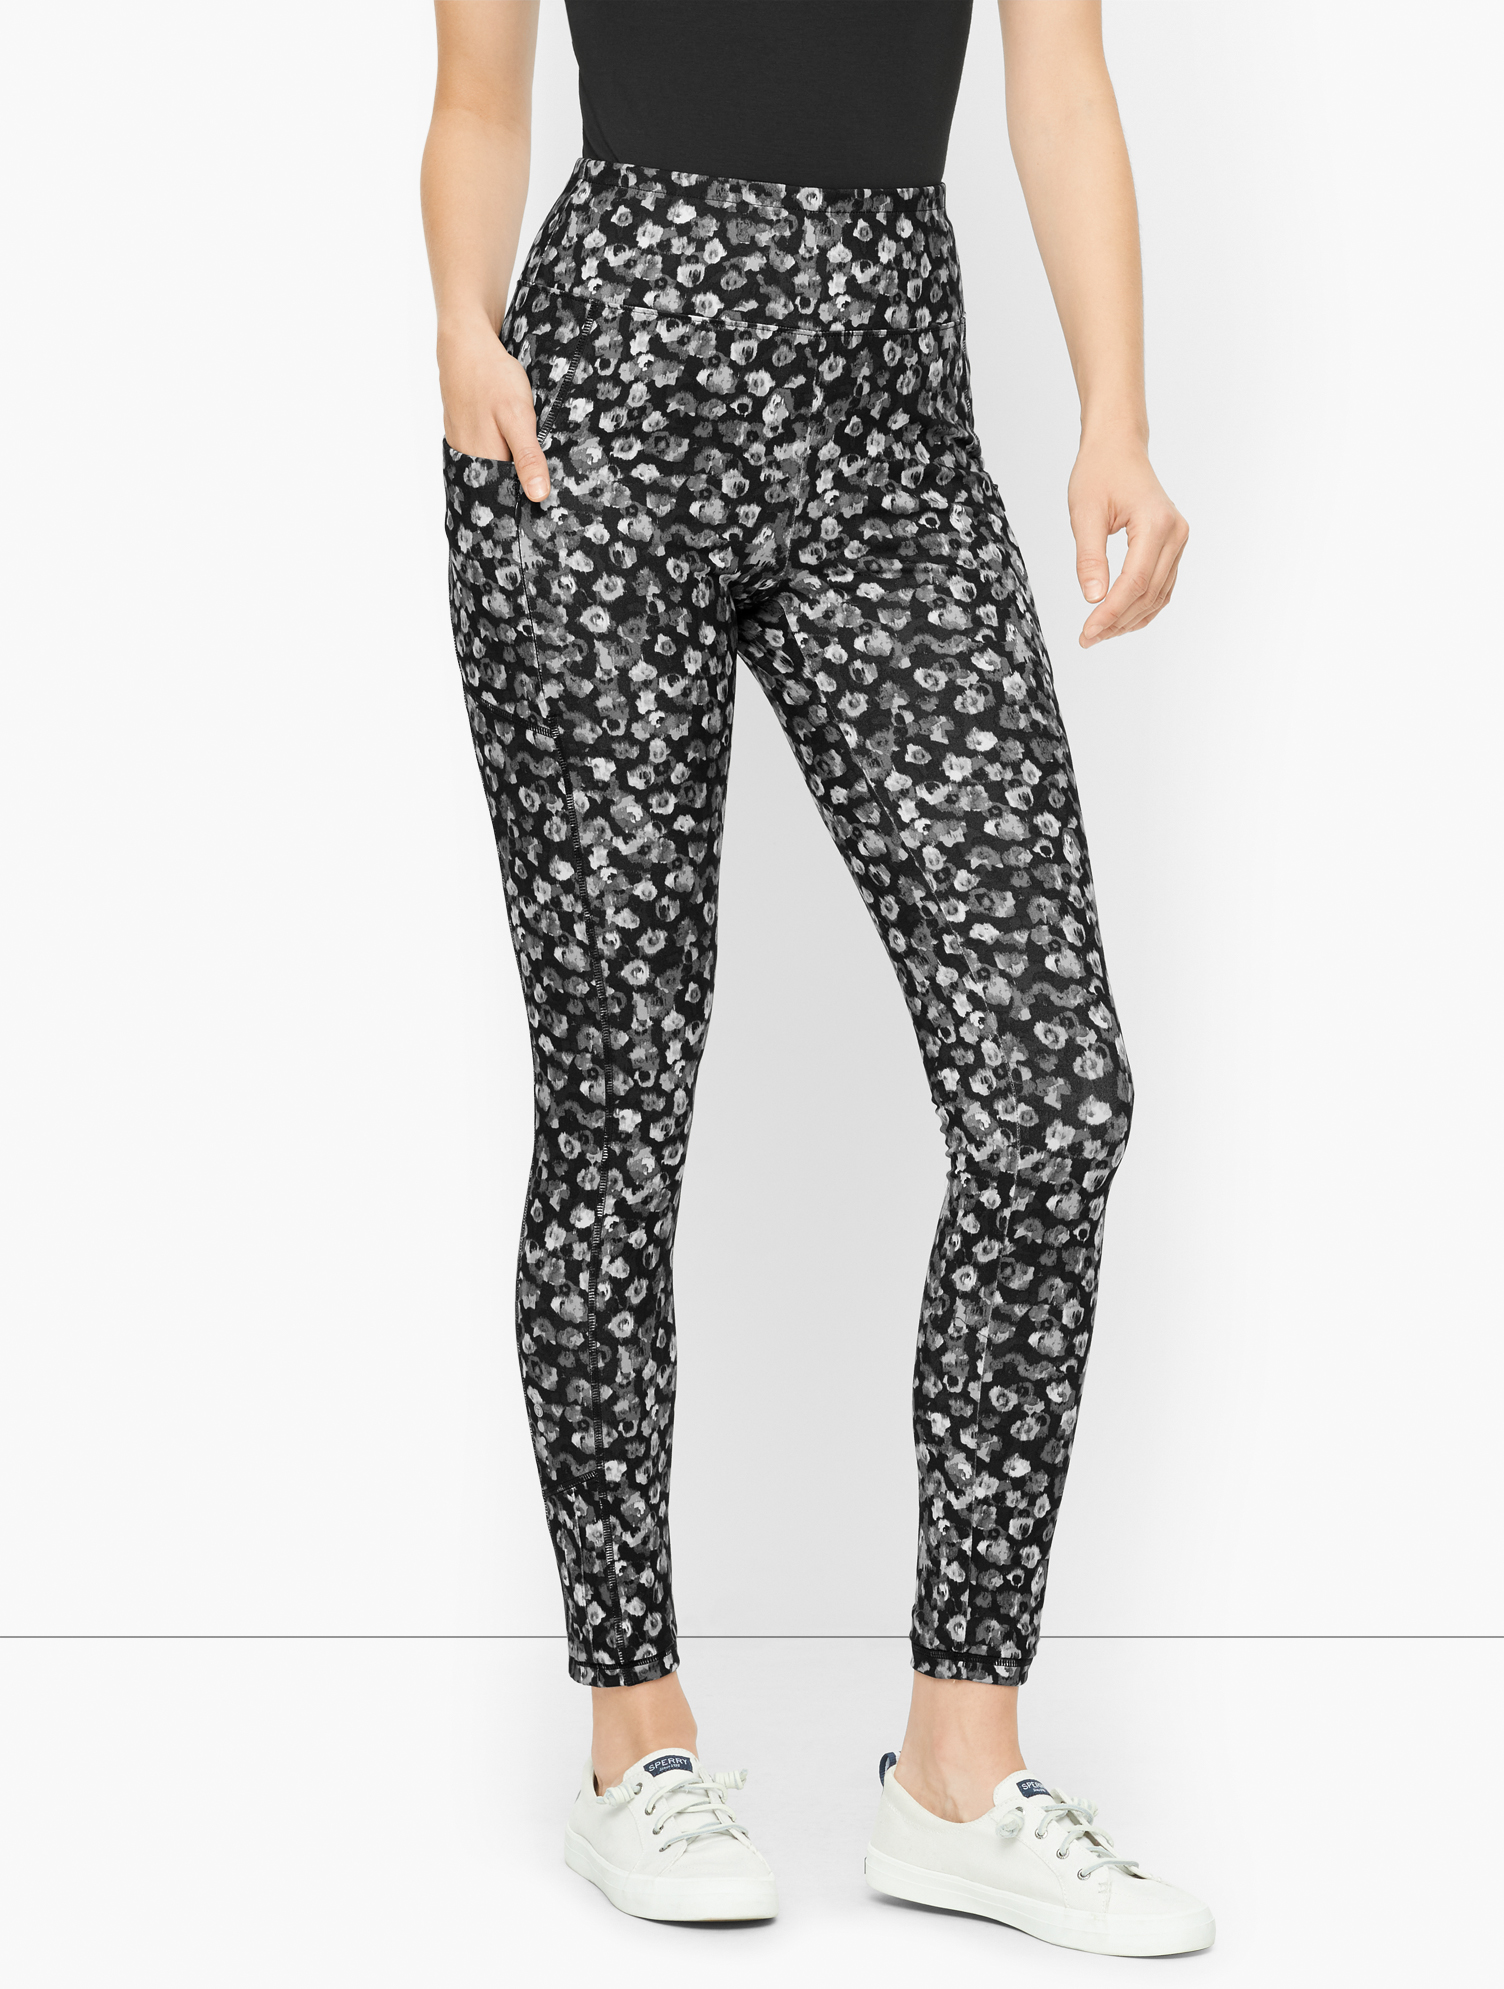 Talbots Petite - On The Move Leggings - Blurred Floral - Black - Small